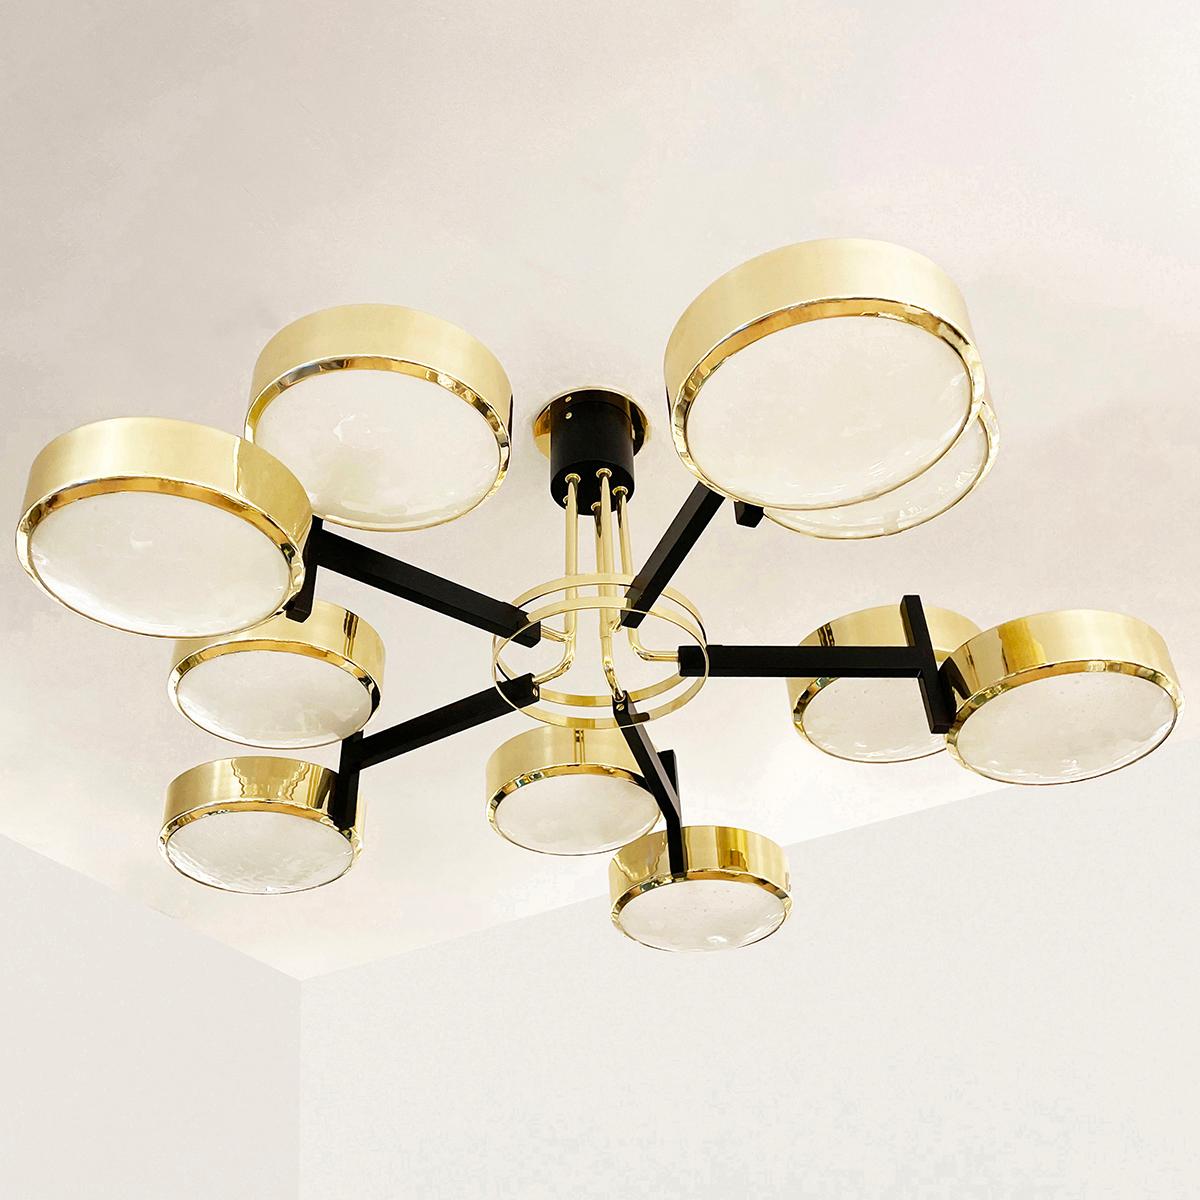 The Eclissi Grande ceiling light is designed around five pairs of eclipsing shades bound by a series of brass rings and a distinctive set of five stems. Shown in polished brass with black accents and fitted with our Murano Bubble